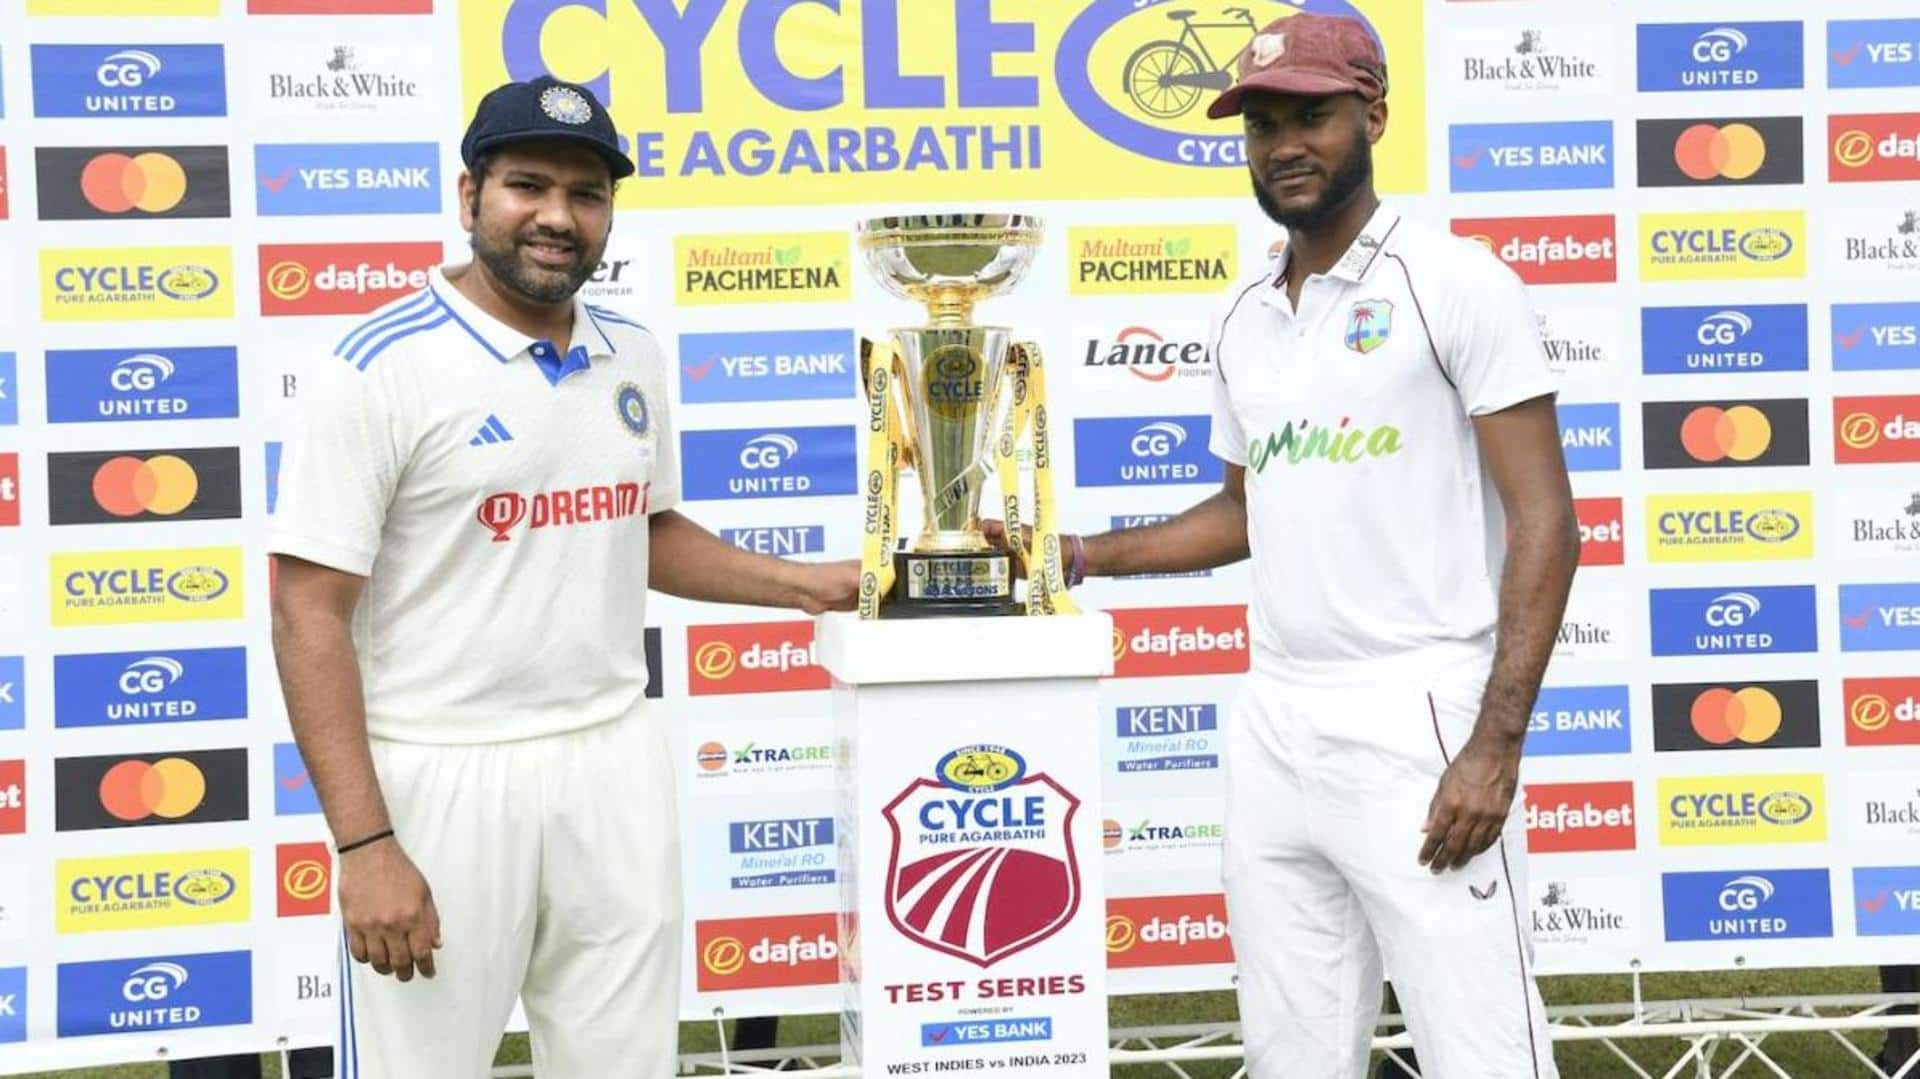 India, West Indies clash in 100th Test between them: Stats